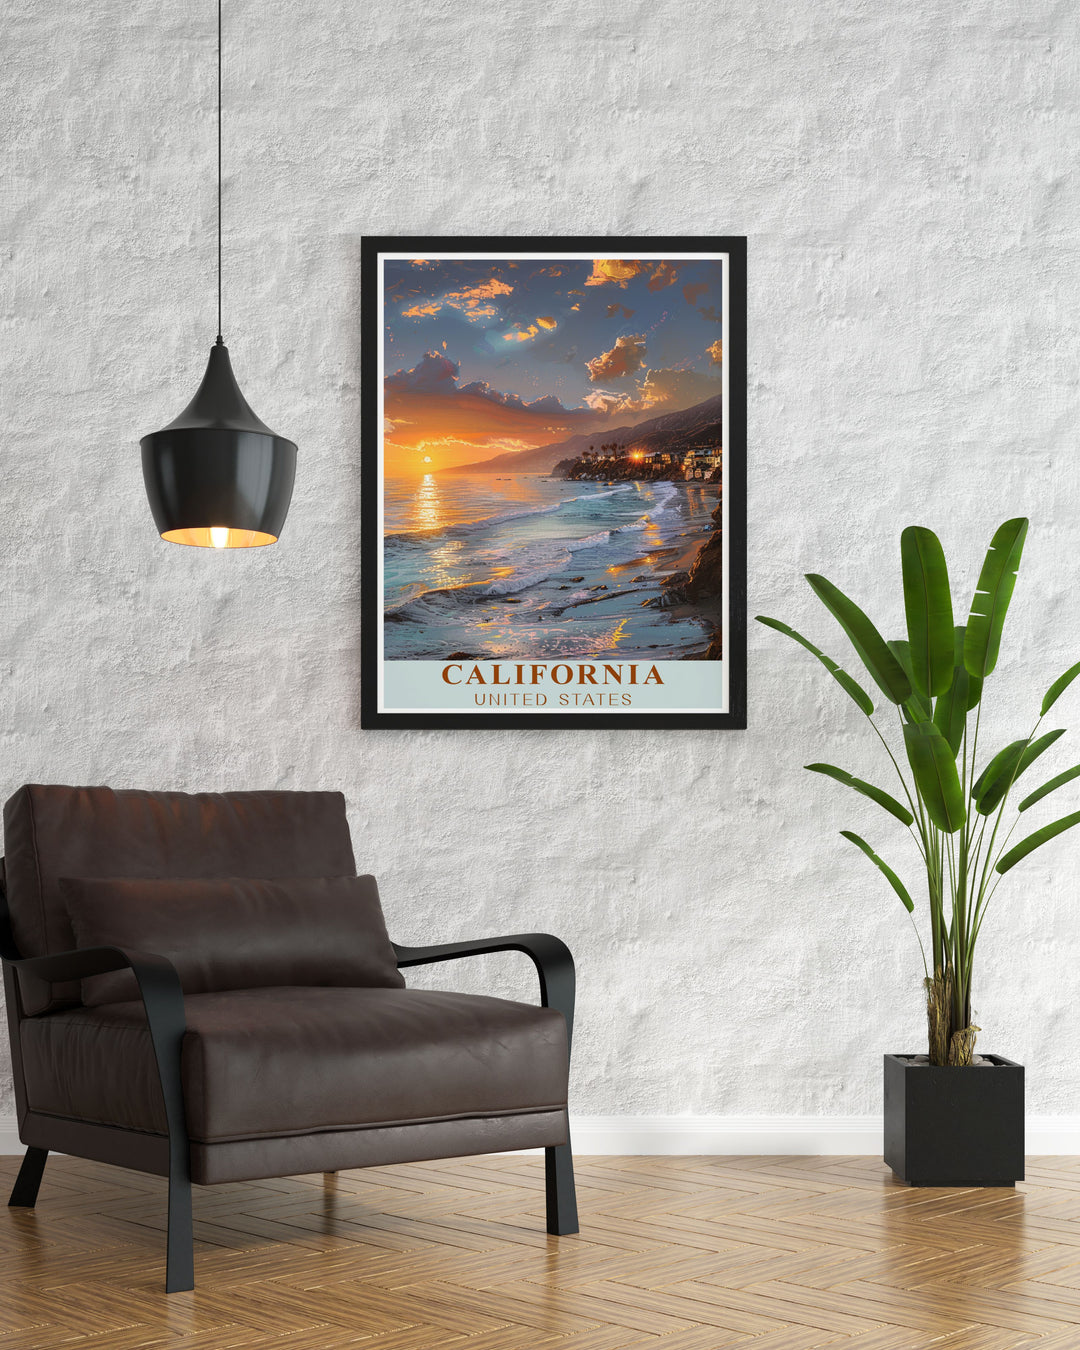 Malibu wall art designed to capture the serene beauty of the beach town with stunning detail and vibrant colors perfect for living rooms bedrooms or offices a must have for anyone who loves California travel and coastal landscapes